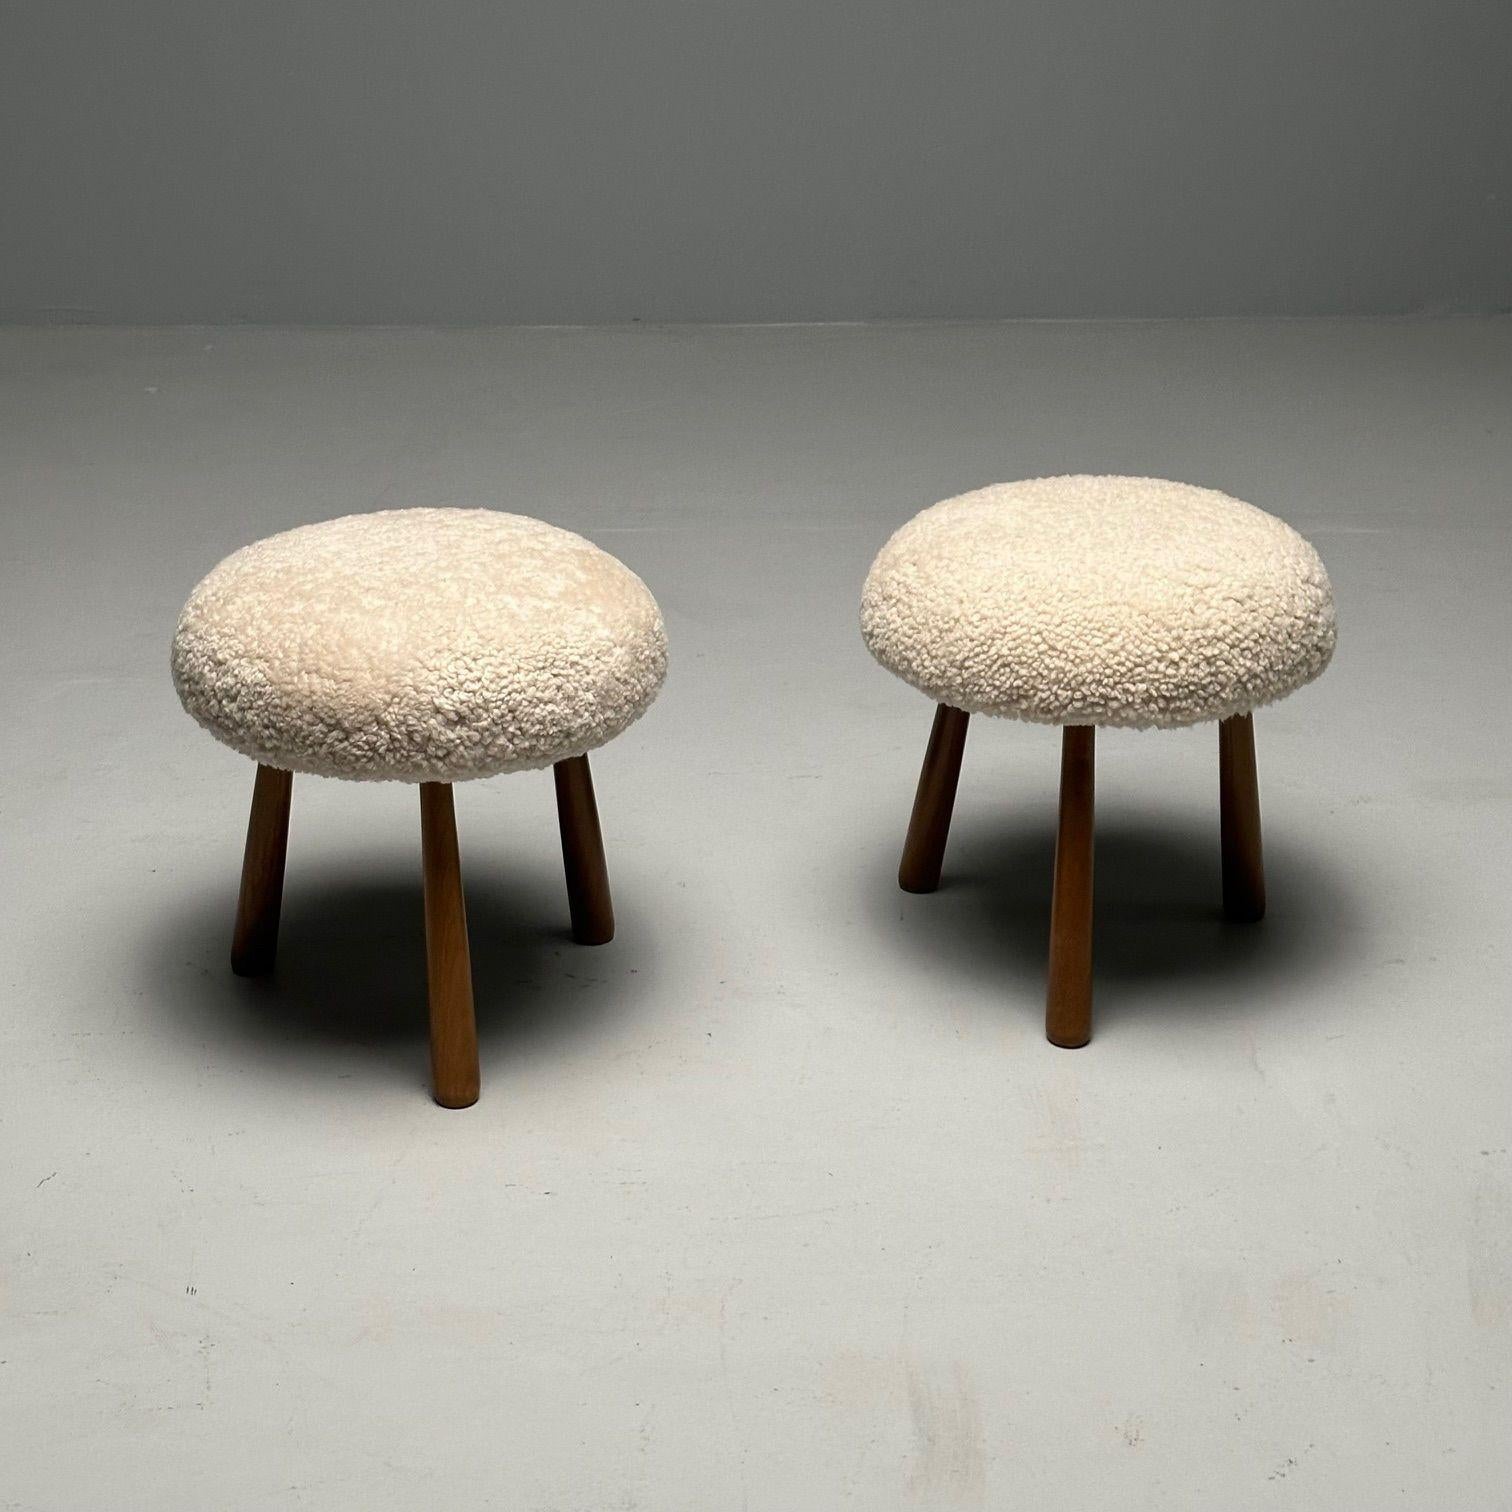 Mid-Century Modern Pair Contemporary Sheepskin Stools / Ottomans, Swedish Modern Style, Shearling For Sale